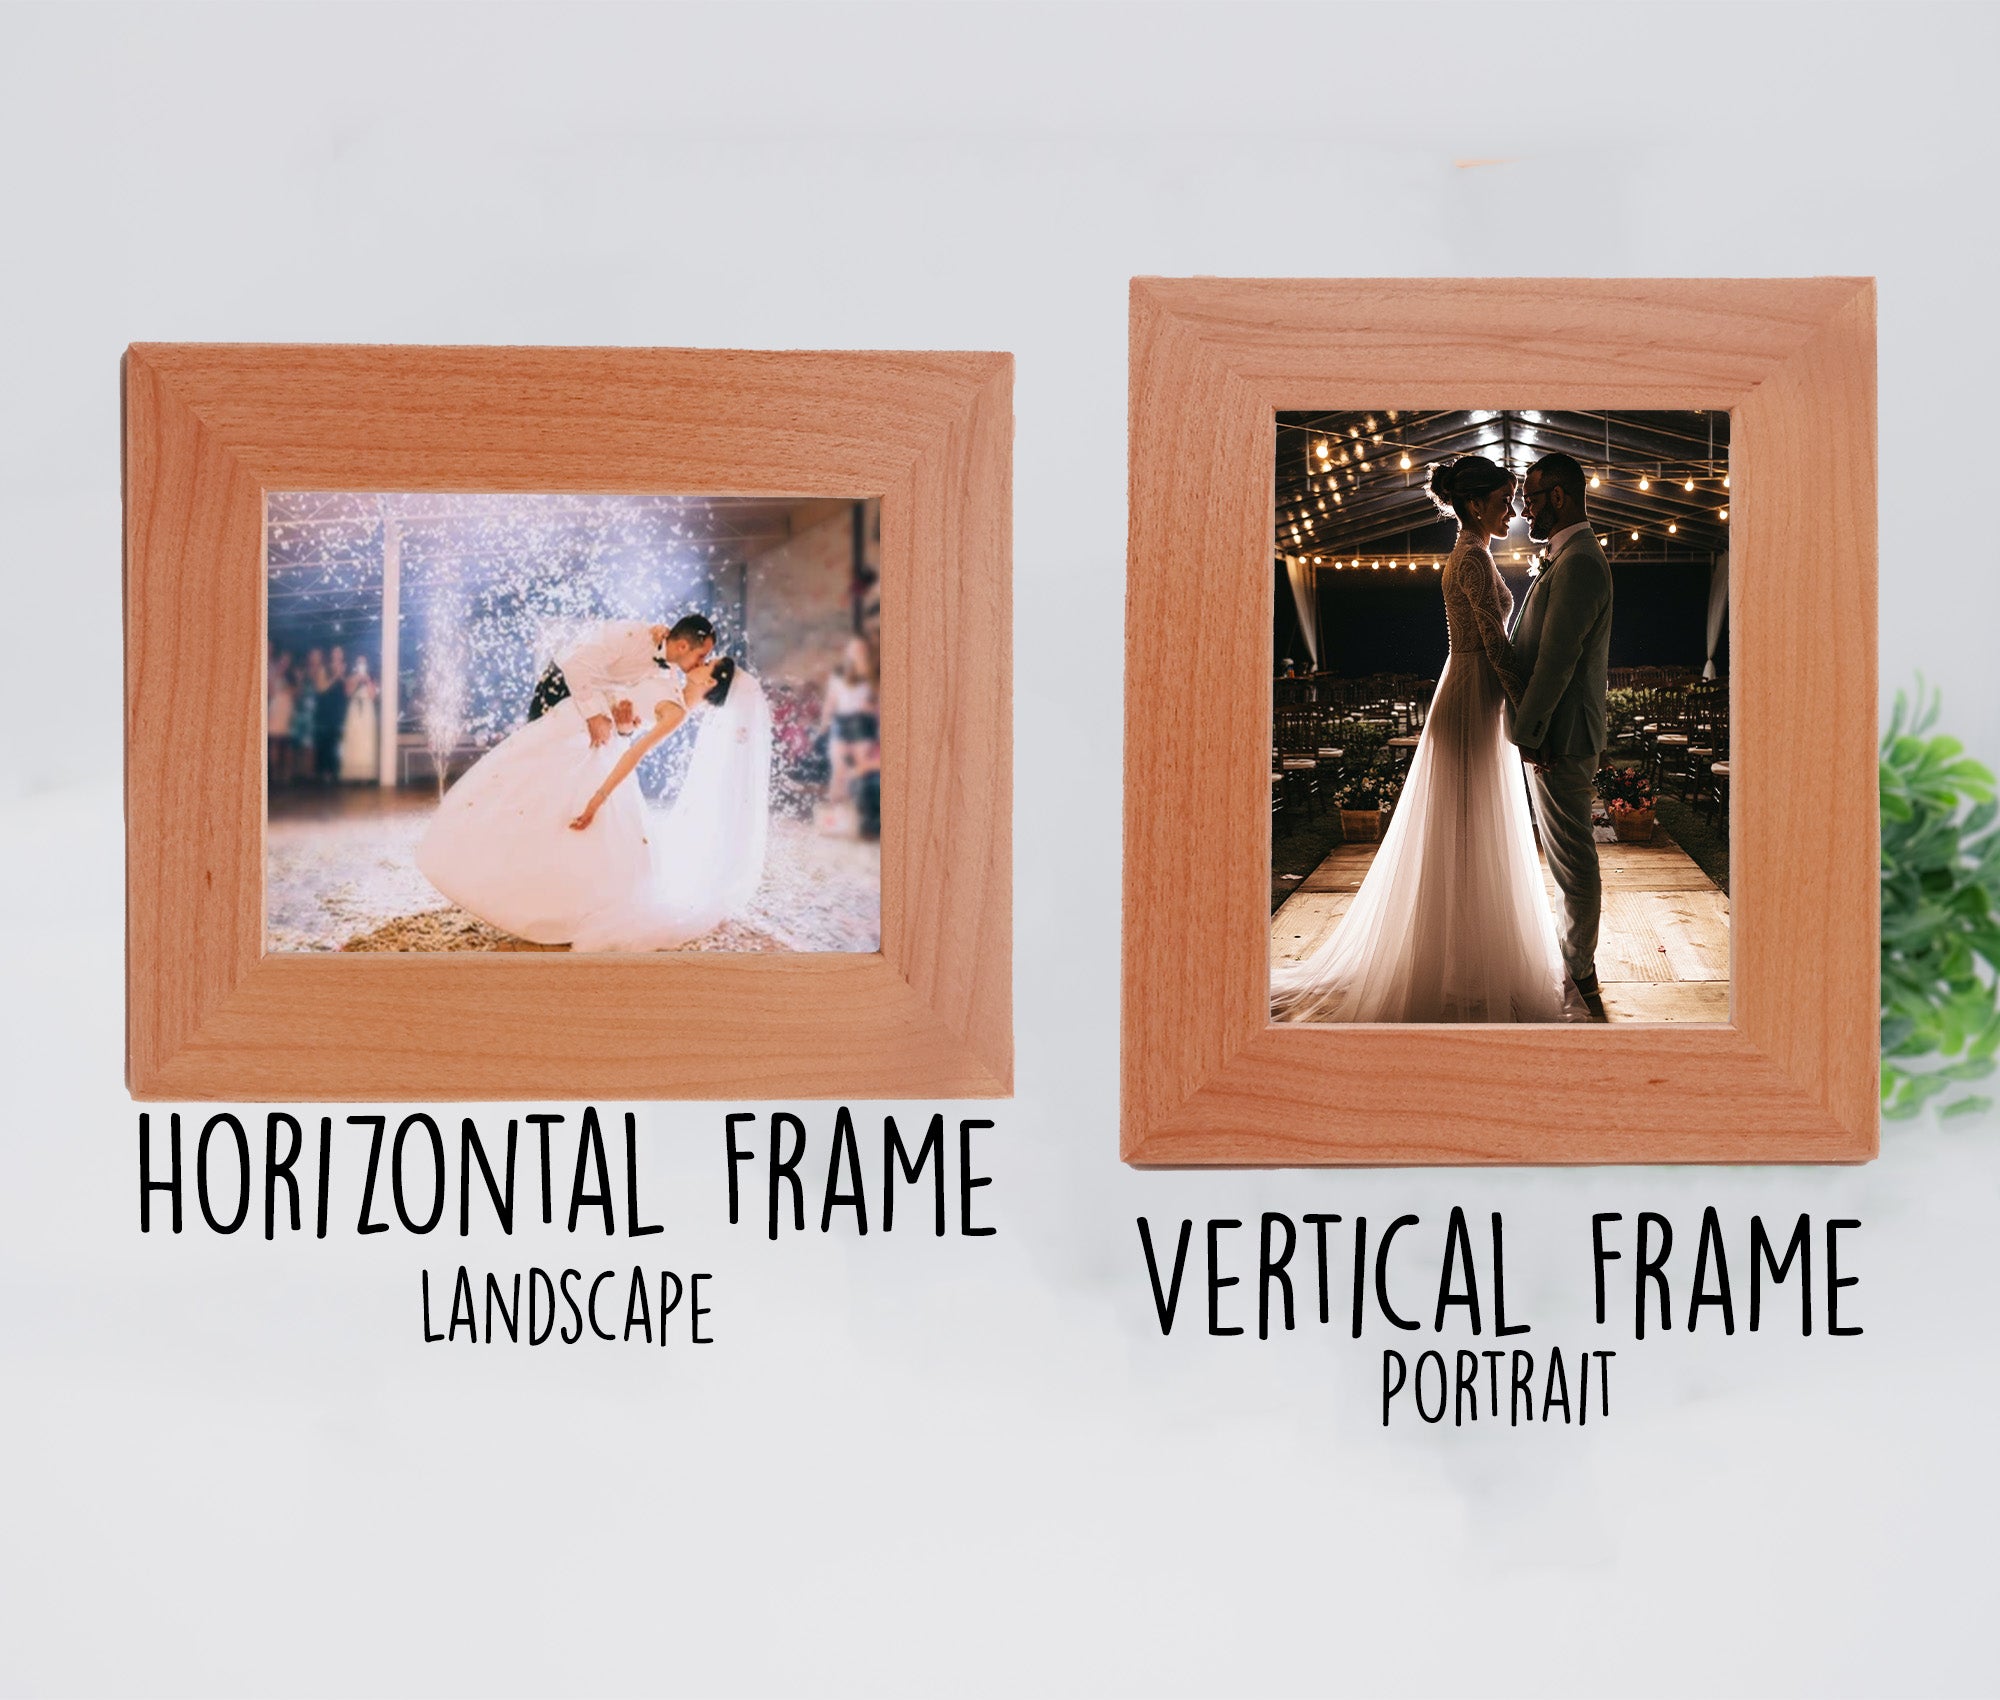 Our Love Is Timeless Engraved Red Alder Photo Frame